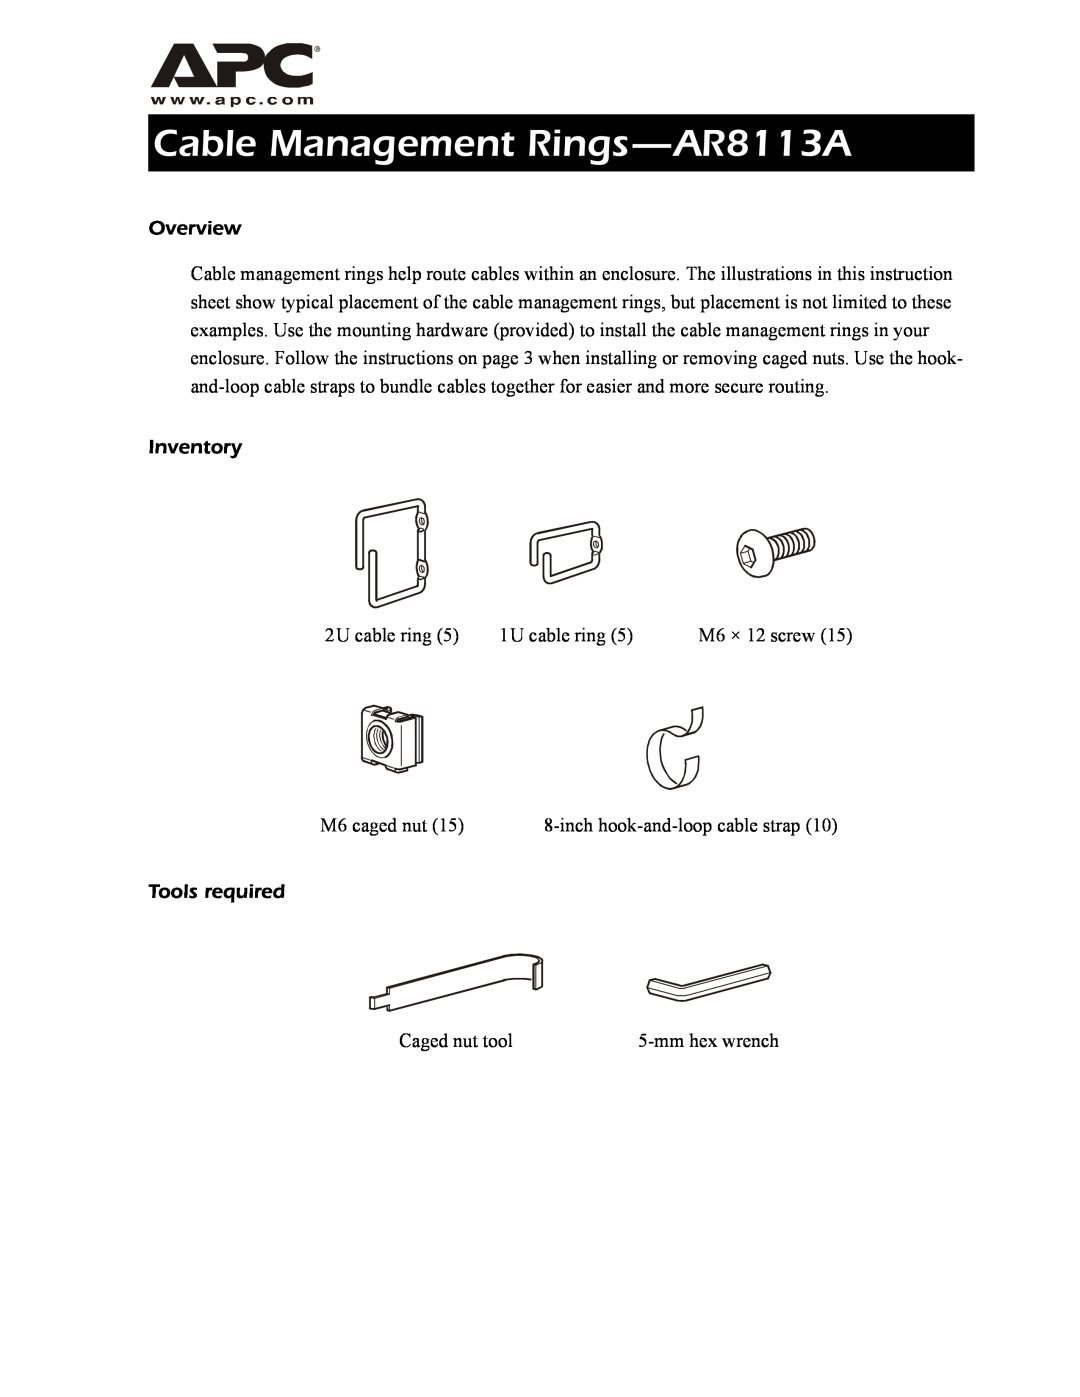 APC instruction sheet Overview, Inventory, Tools required, Cable Management Rings-AR8113A 